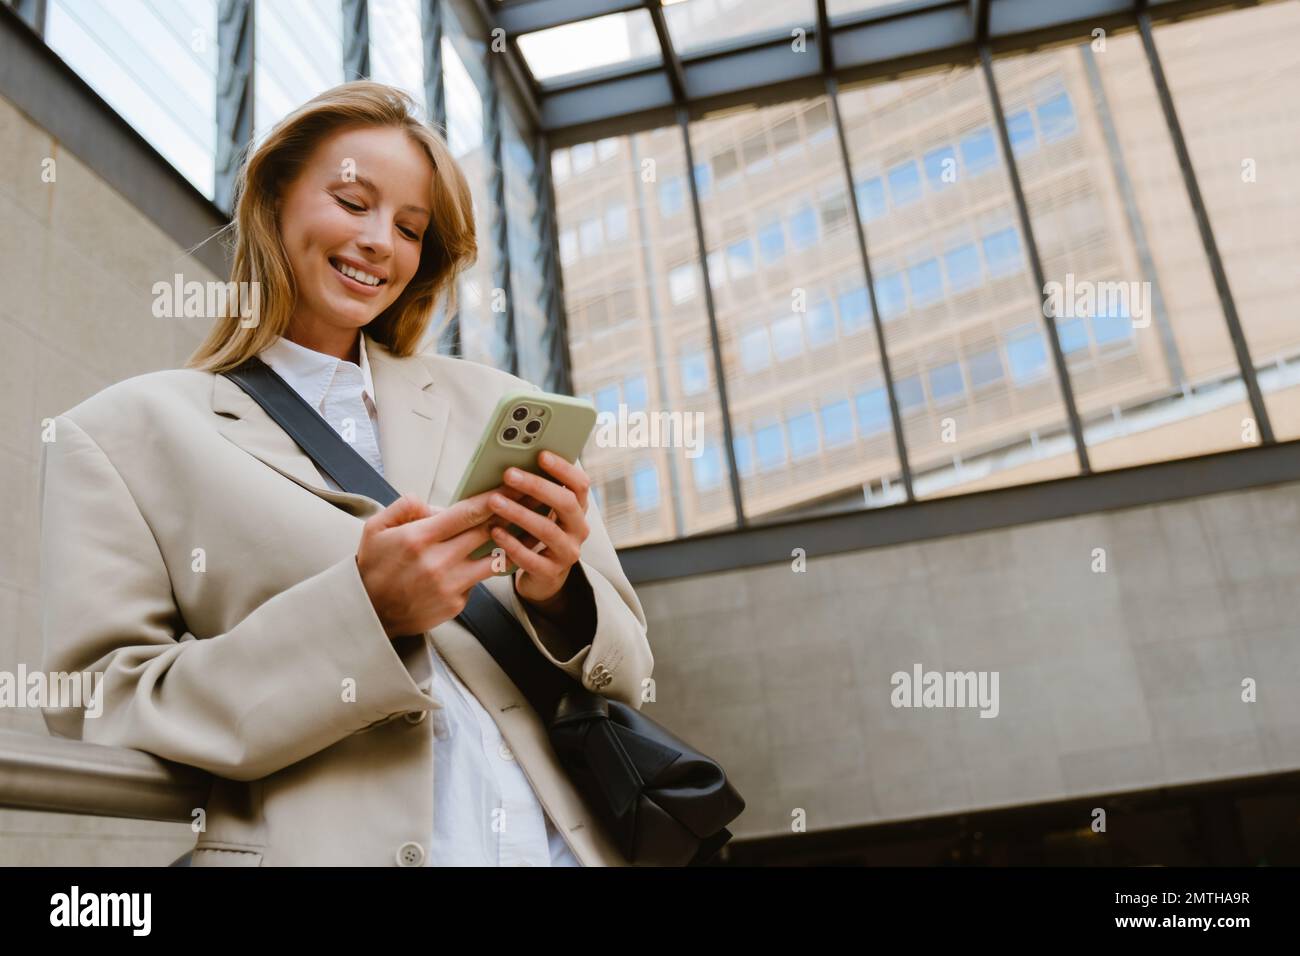 Young beautiful smiling happy woman holding and using her phone, while standing indoors leaning on the railing Stock Photo